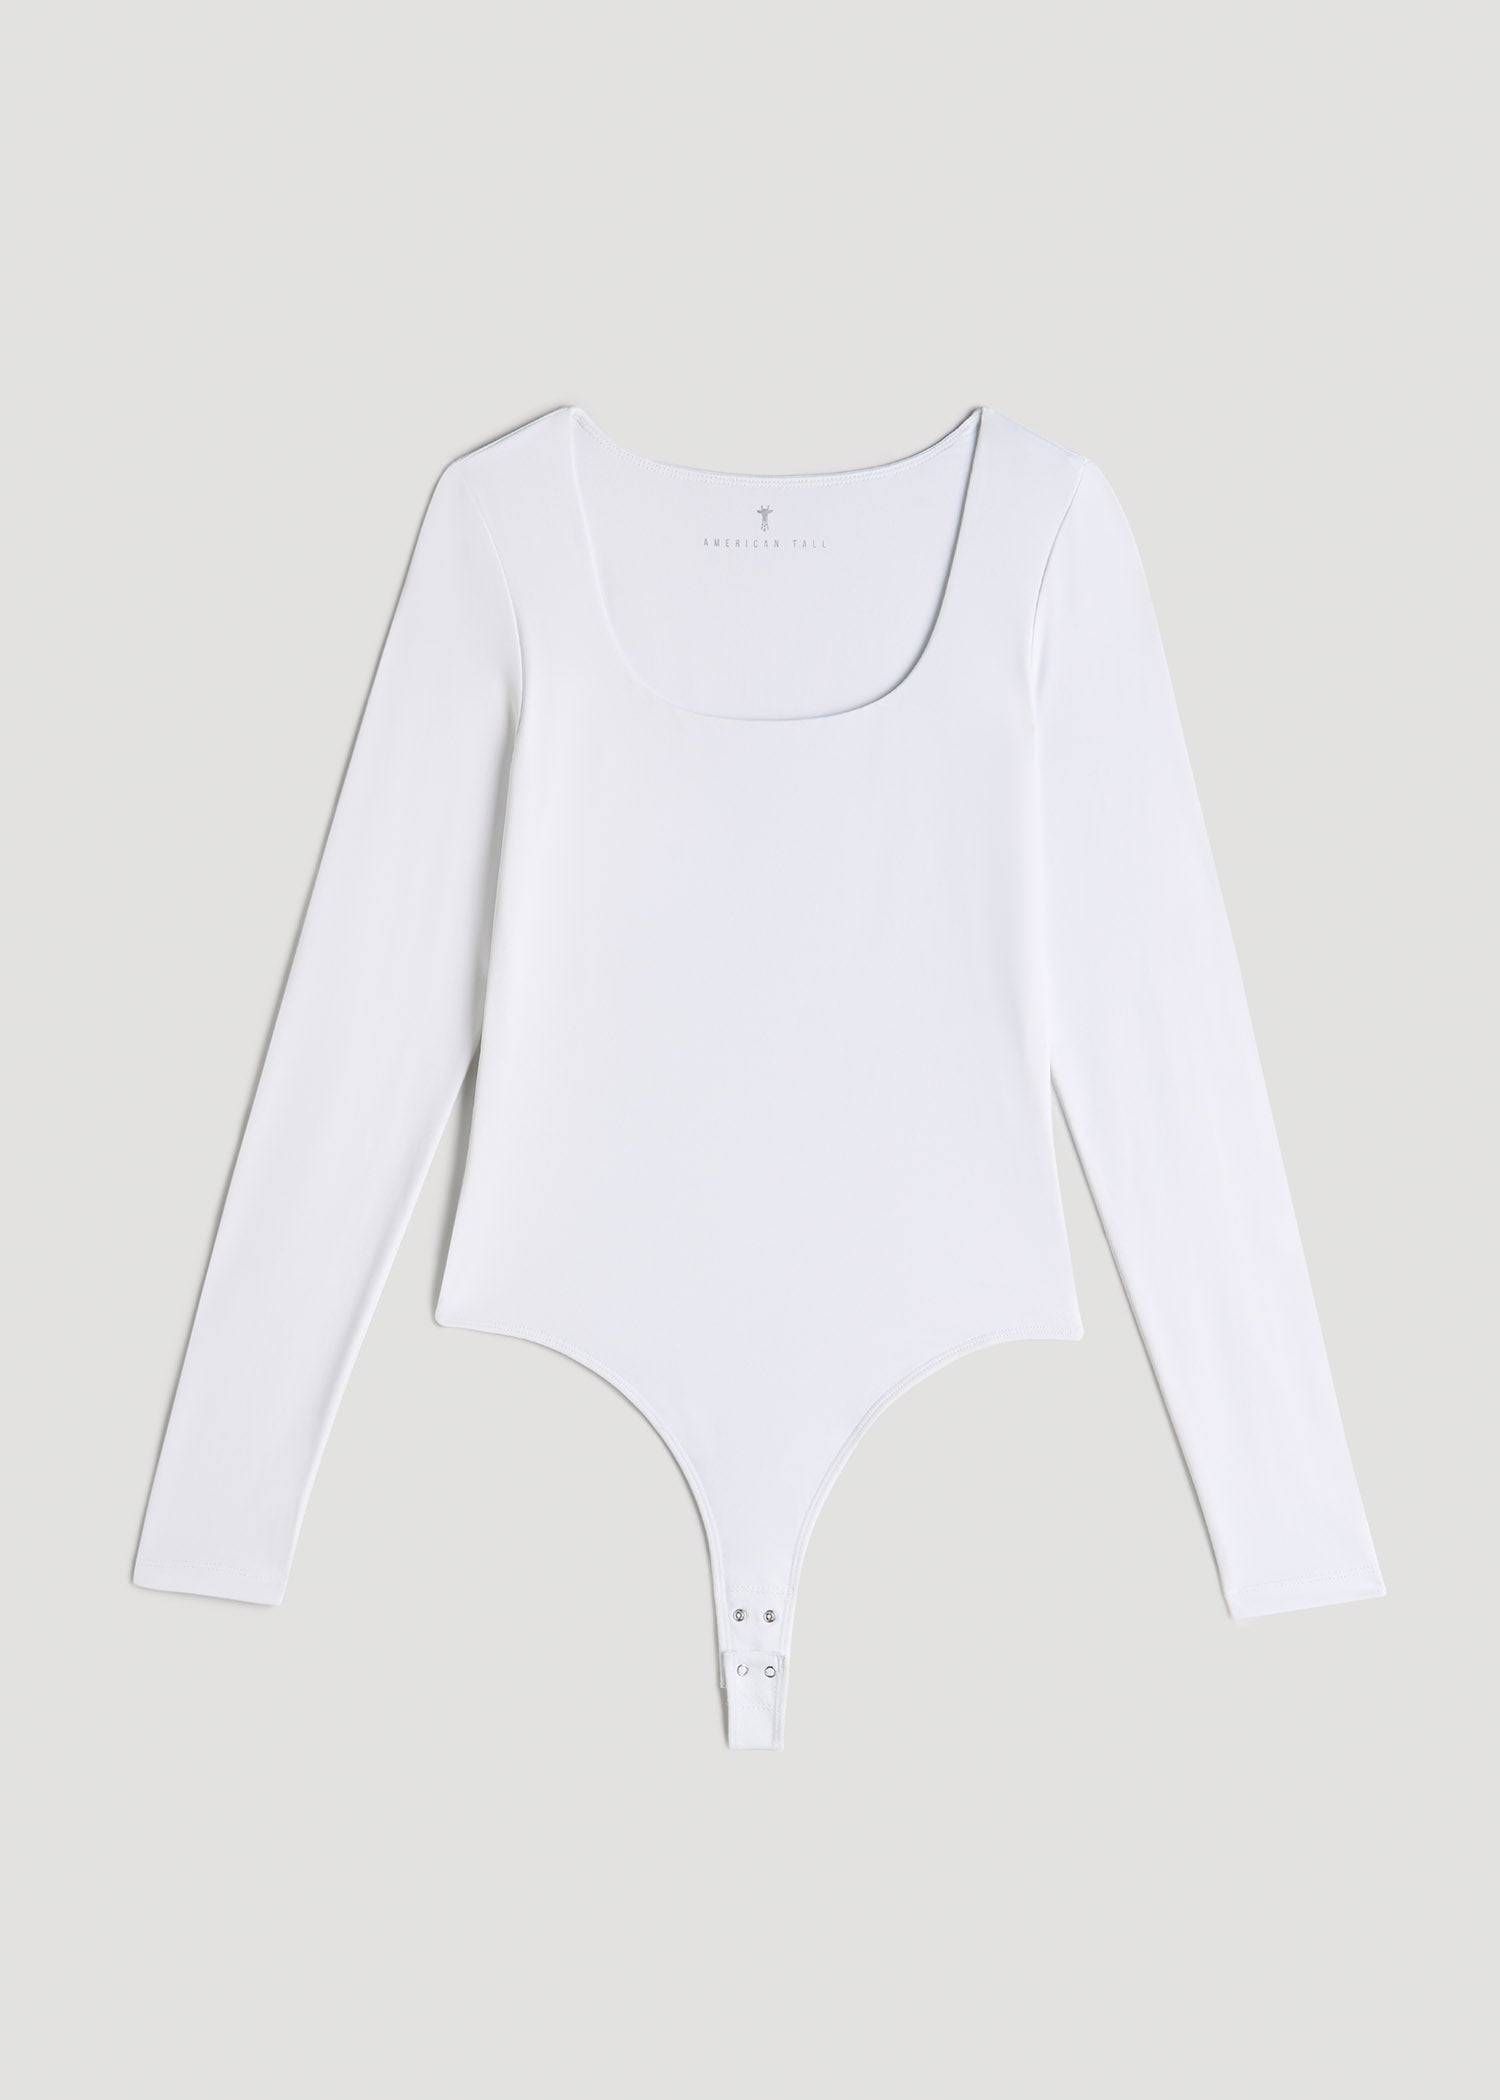 RHWHOGLL square neck bodysuit white lace  